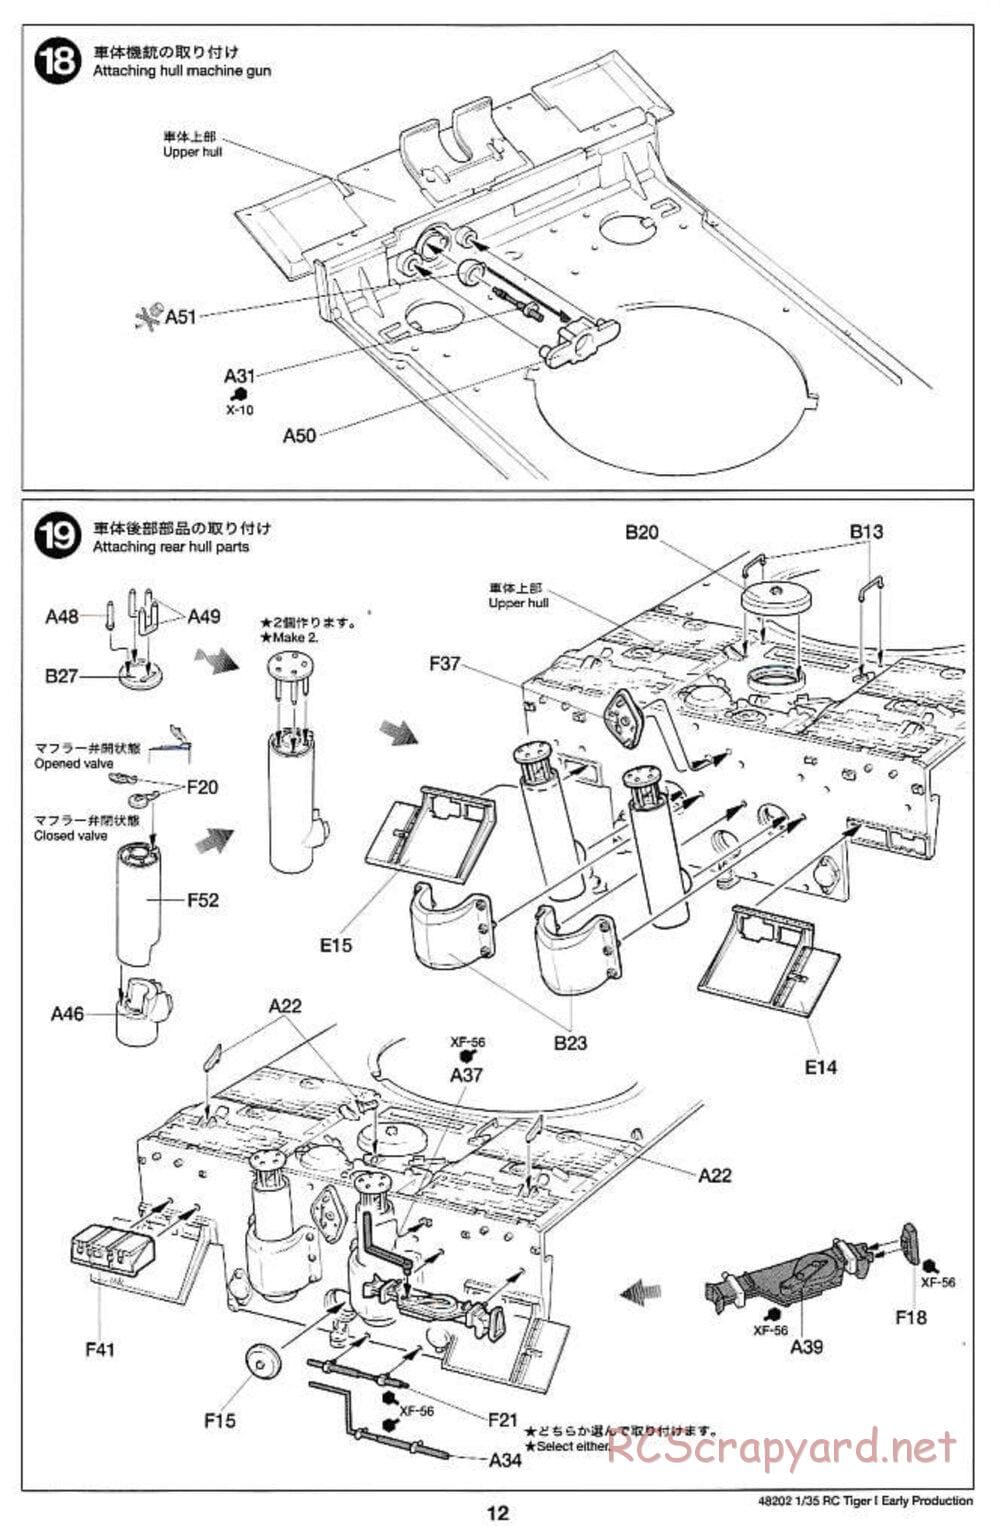 Tamiya - German Tiger 1 Early Production - 1/35 Scale Chassis - Manual - Page 12